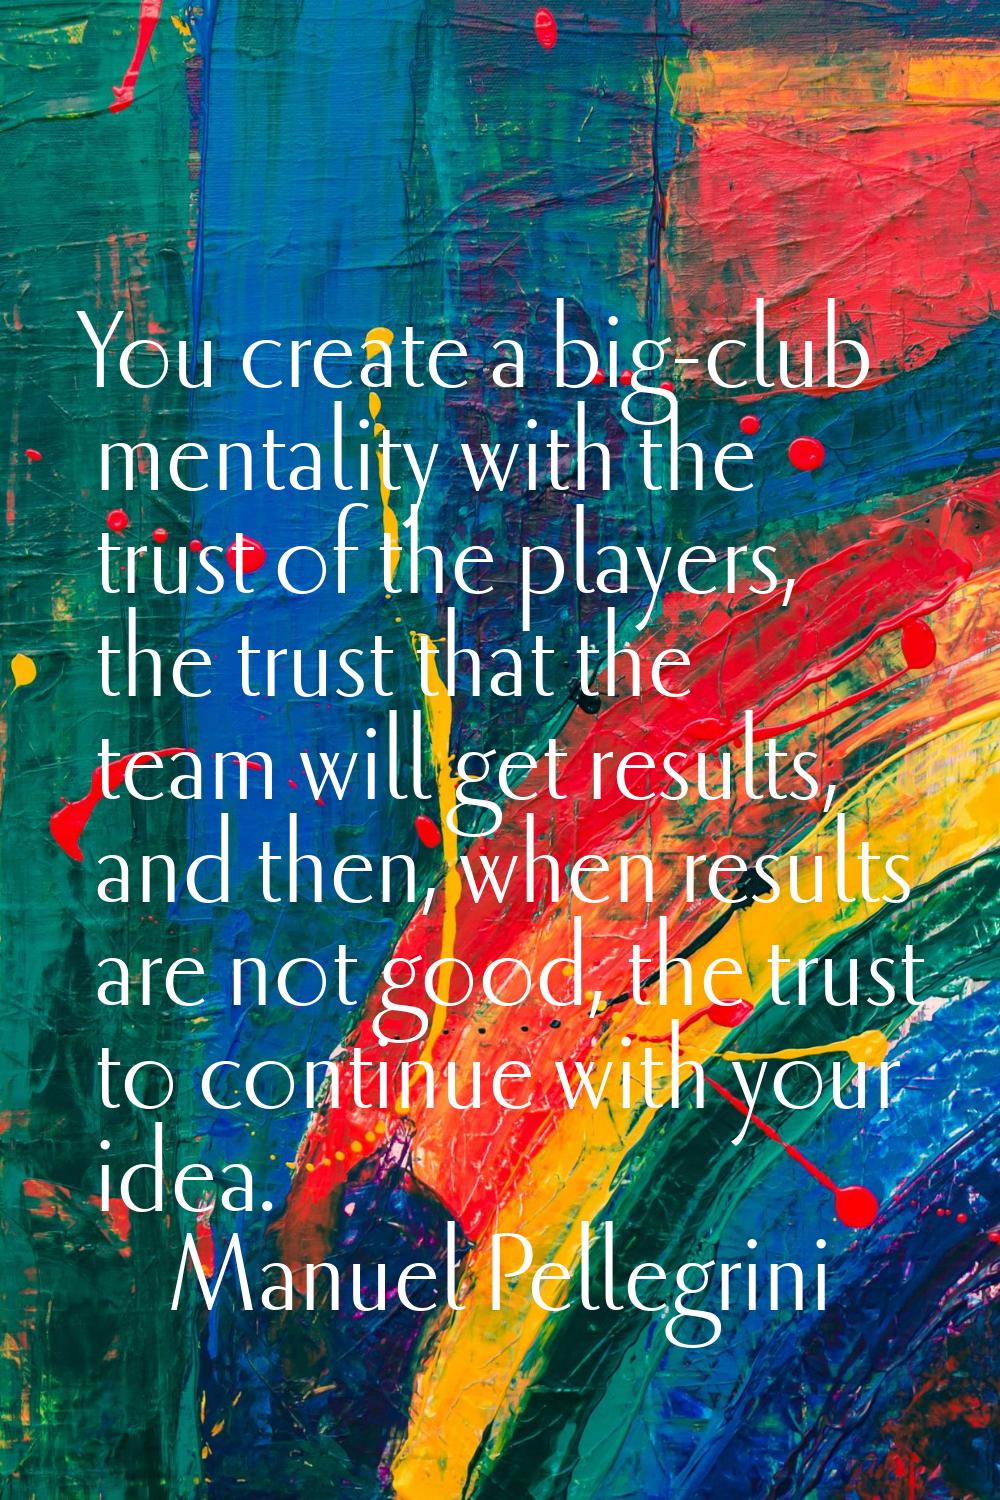 You create a big-club mentality with the trust of the players, the trust that the team will get res